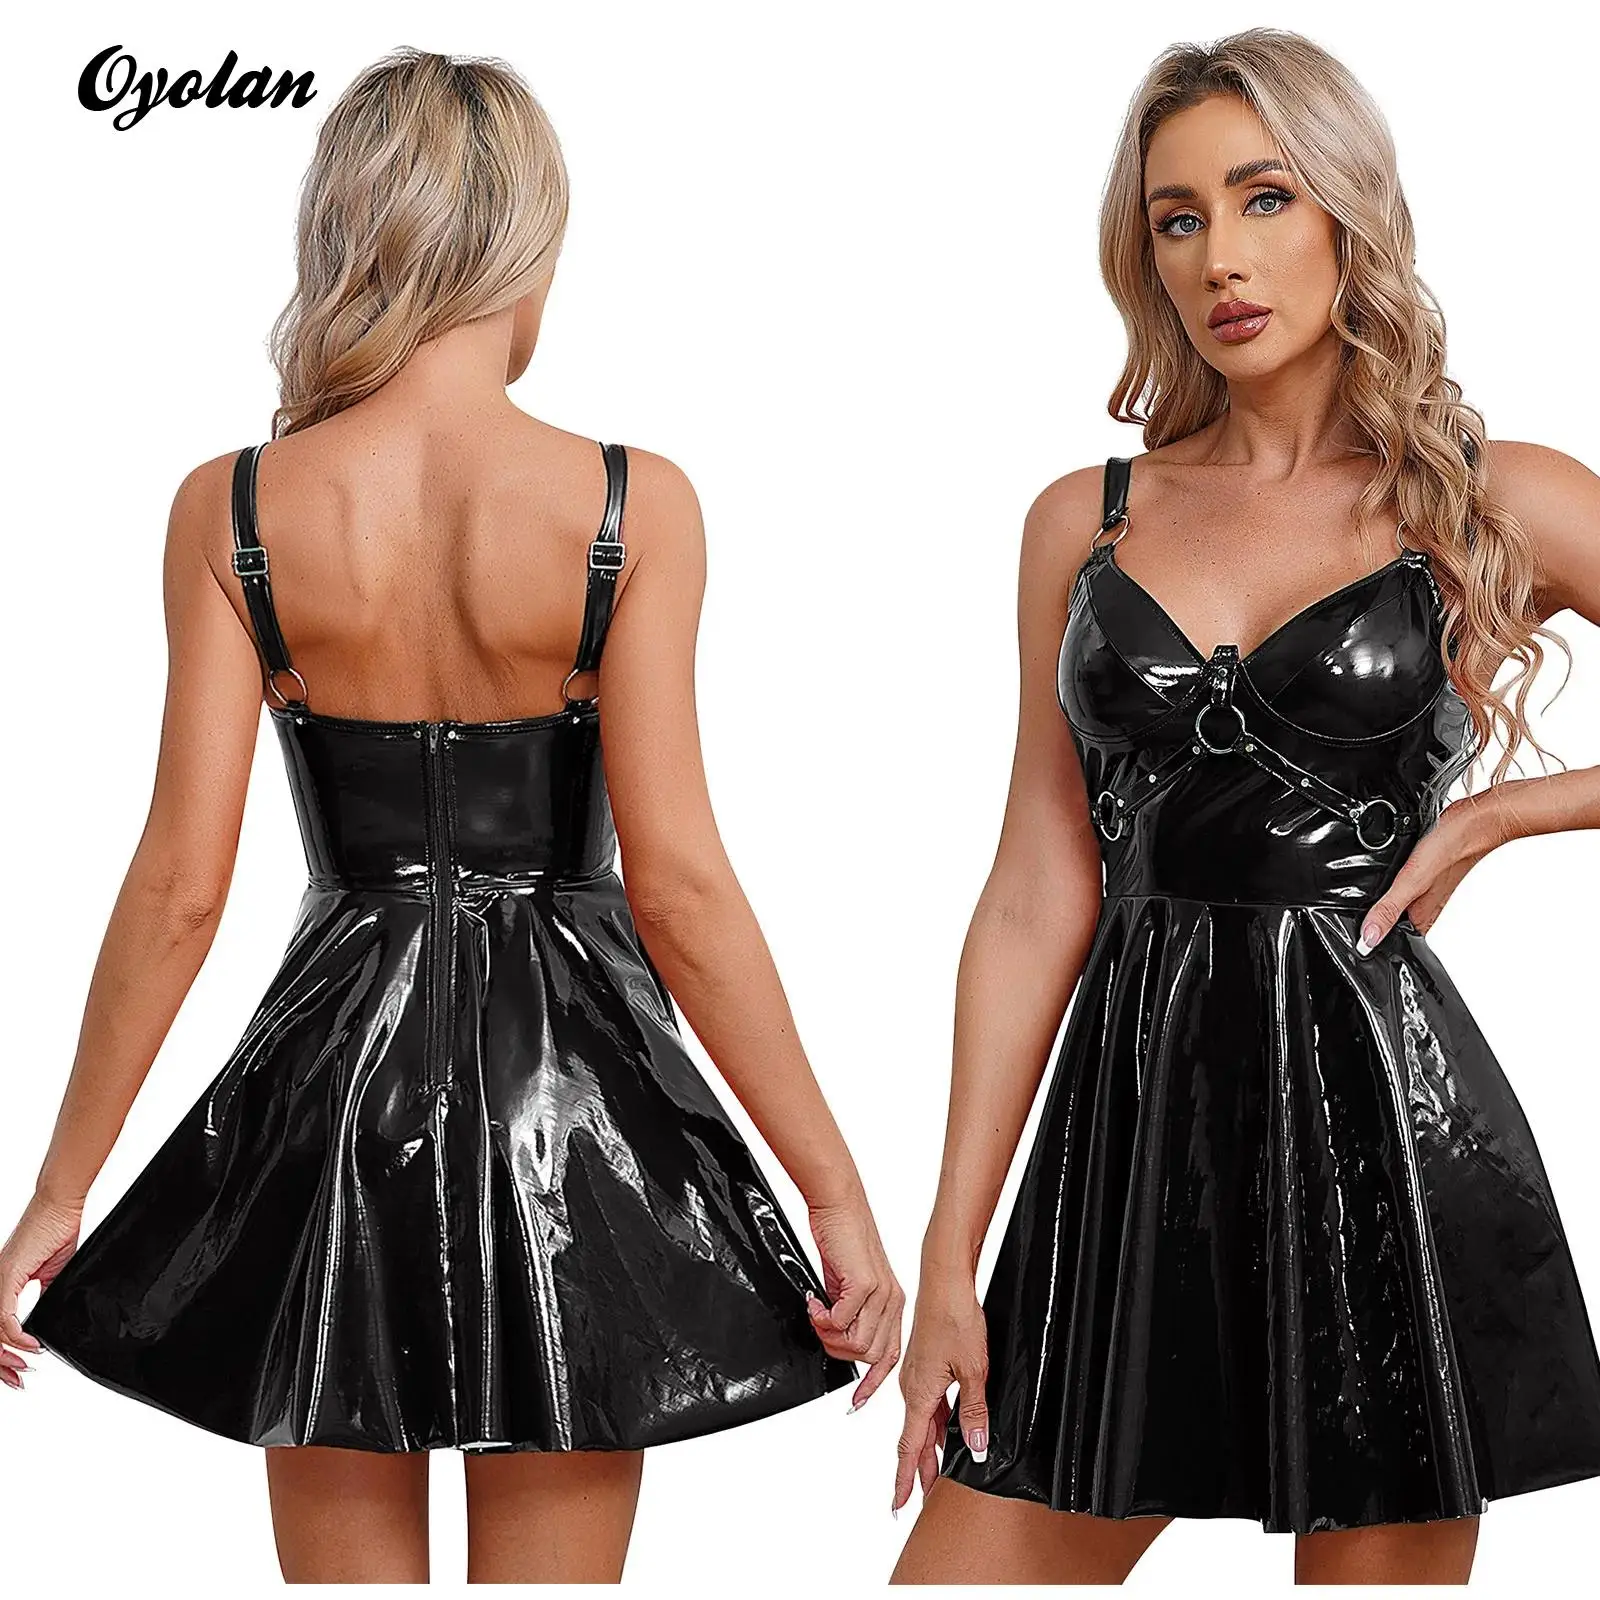 

Sexy Womens Glossy Patent Leather Latex Dress with O-Ring Rivets Gothic Punk Strappy V Neck A-Line Club Mini Dress Clubwear